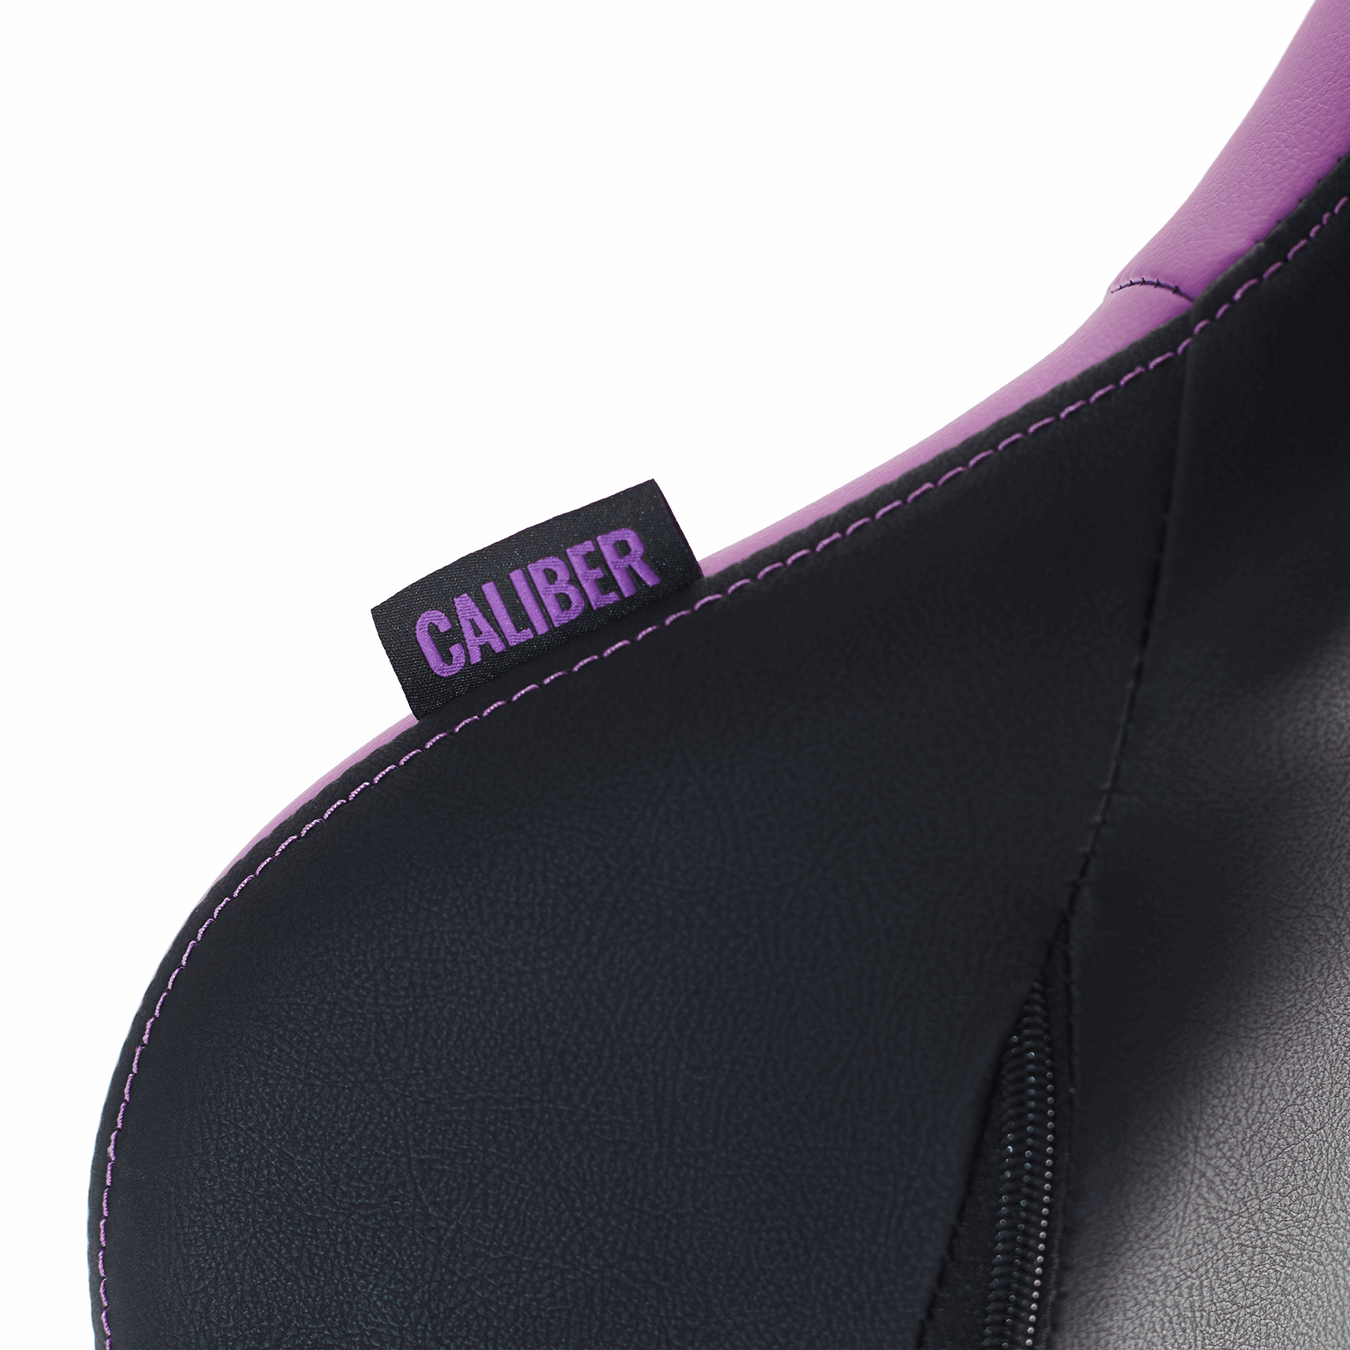 Caliber R2 Purple - With an ergonomic design and premium PU material, it is perfect for long hours of work or gameplay.